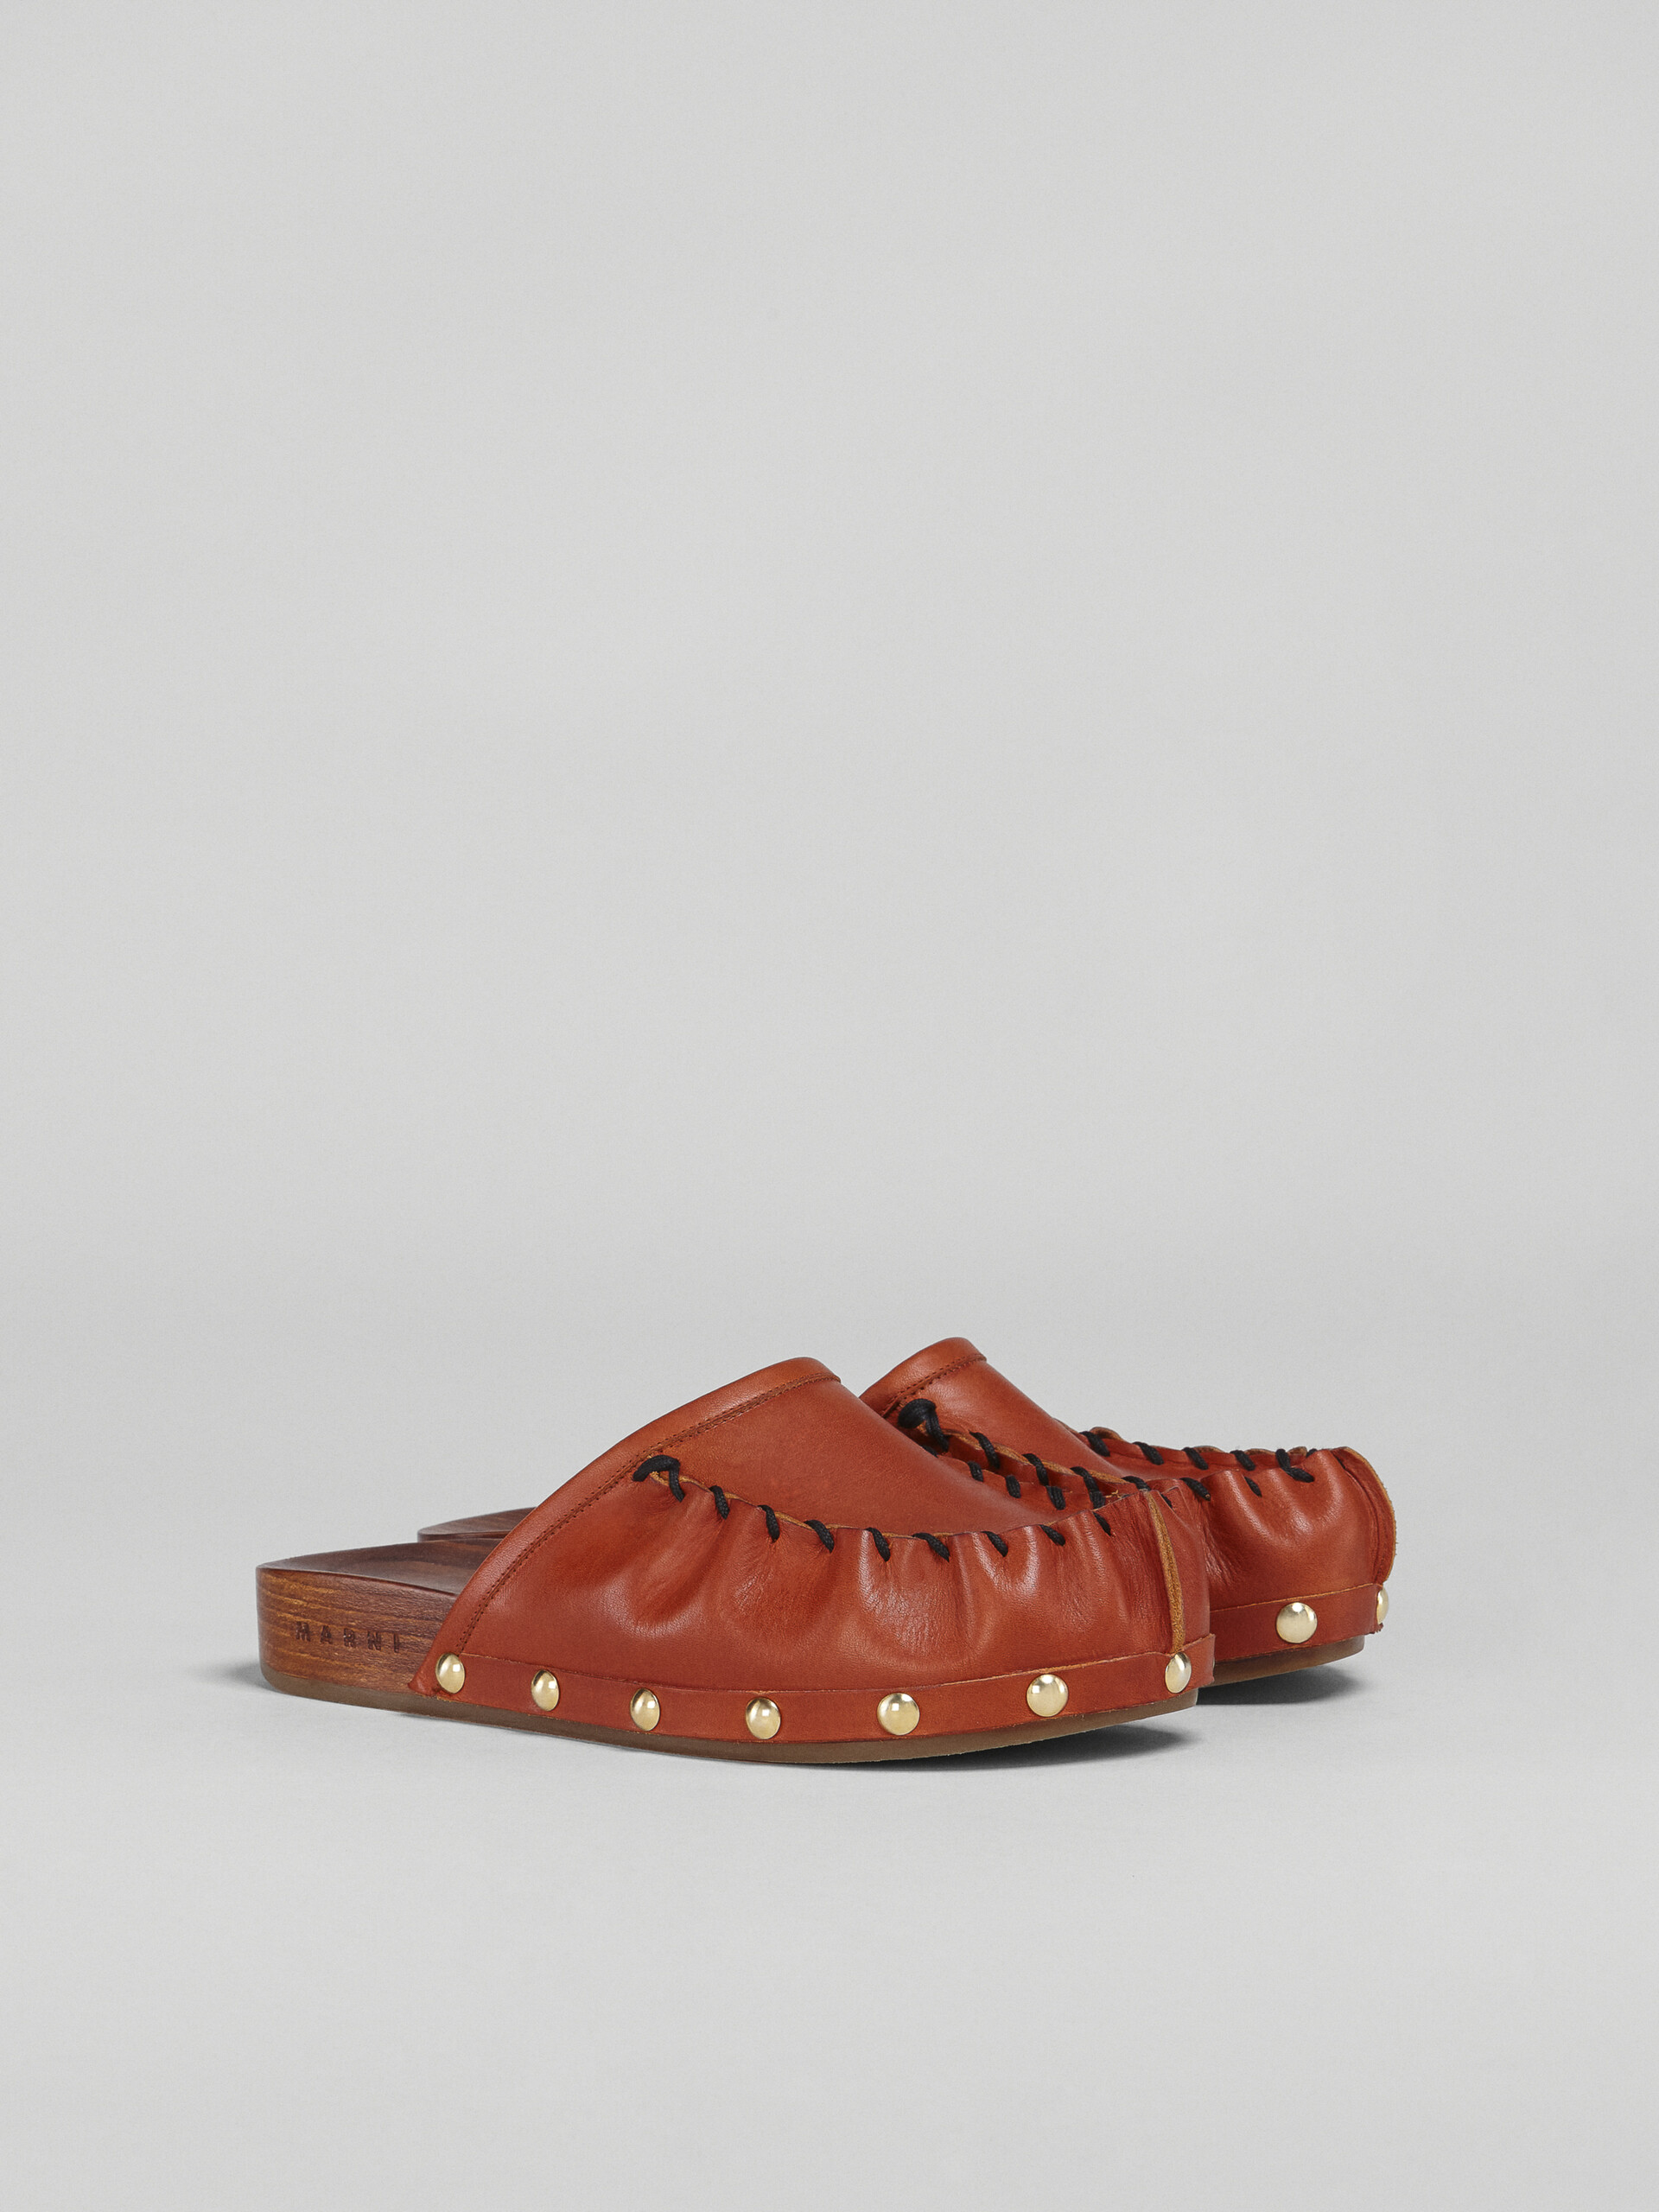 Vegetable-tanned leather and wood clog - Clogs - Image 2